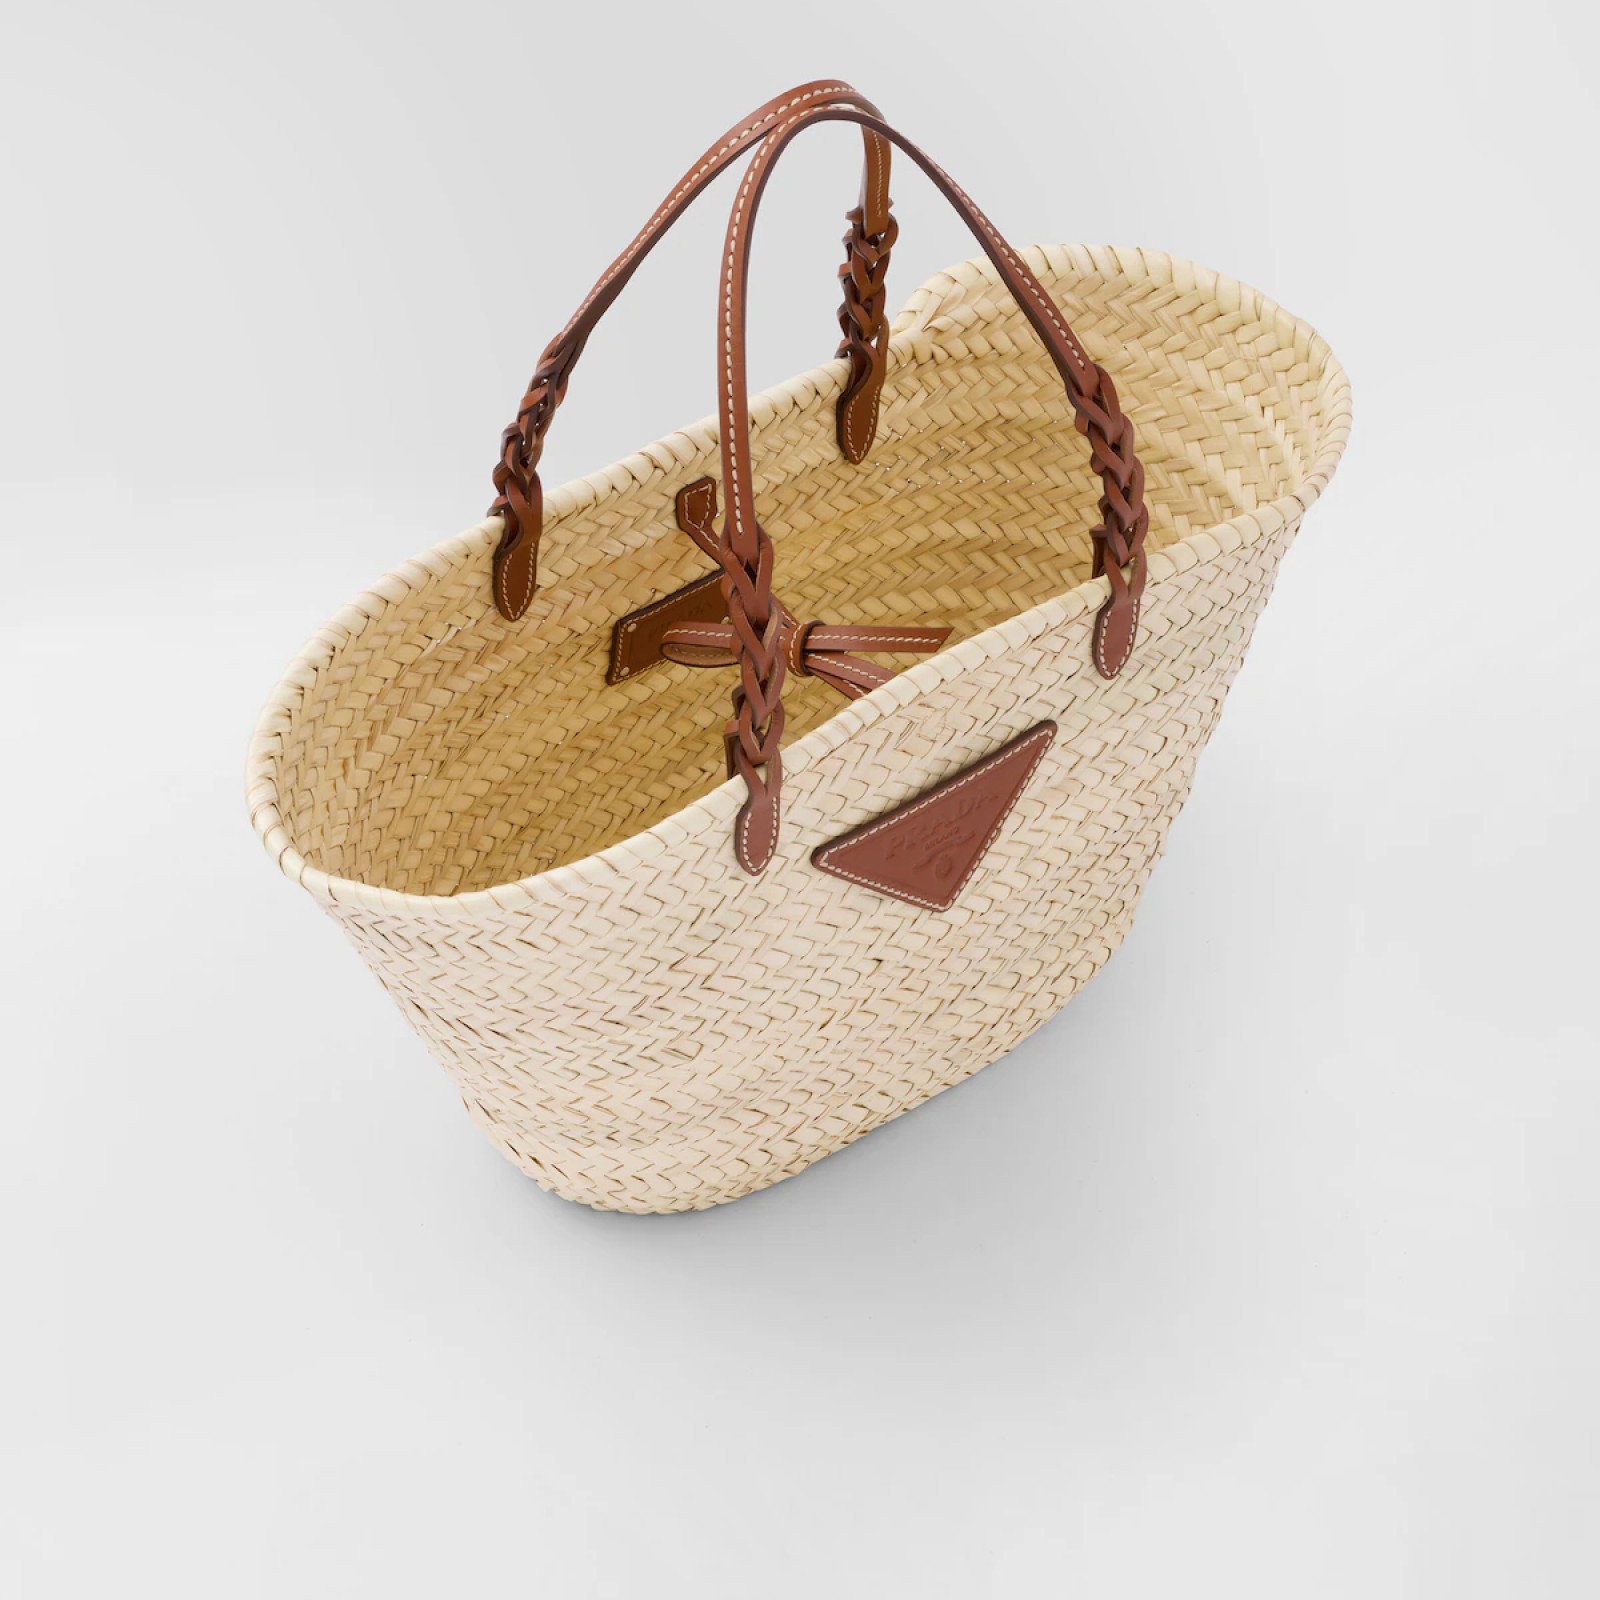 Woven Palm and Leather Tote